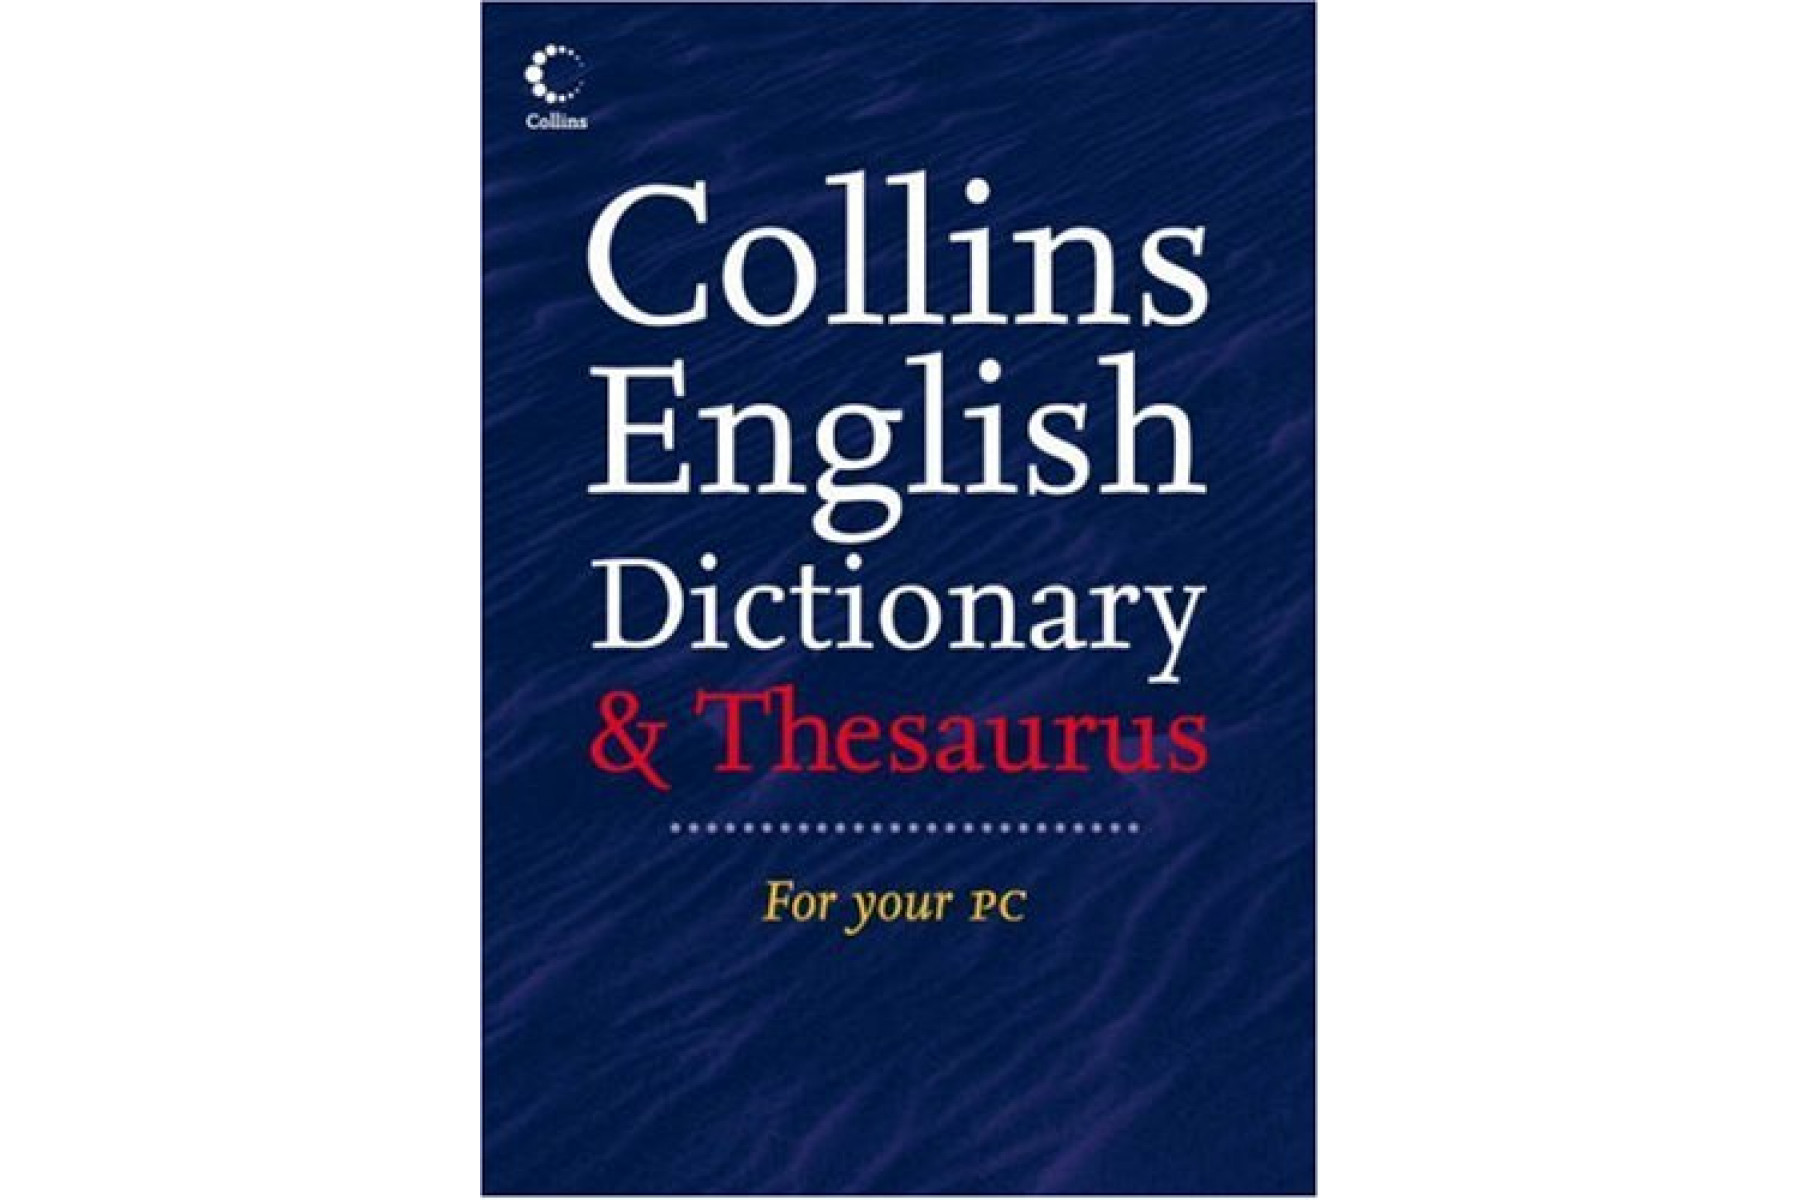 Collins English Dictionary and Thesaurus on CD-Rom